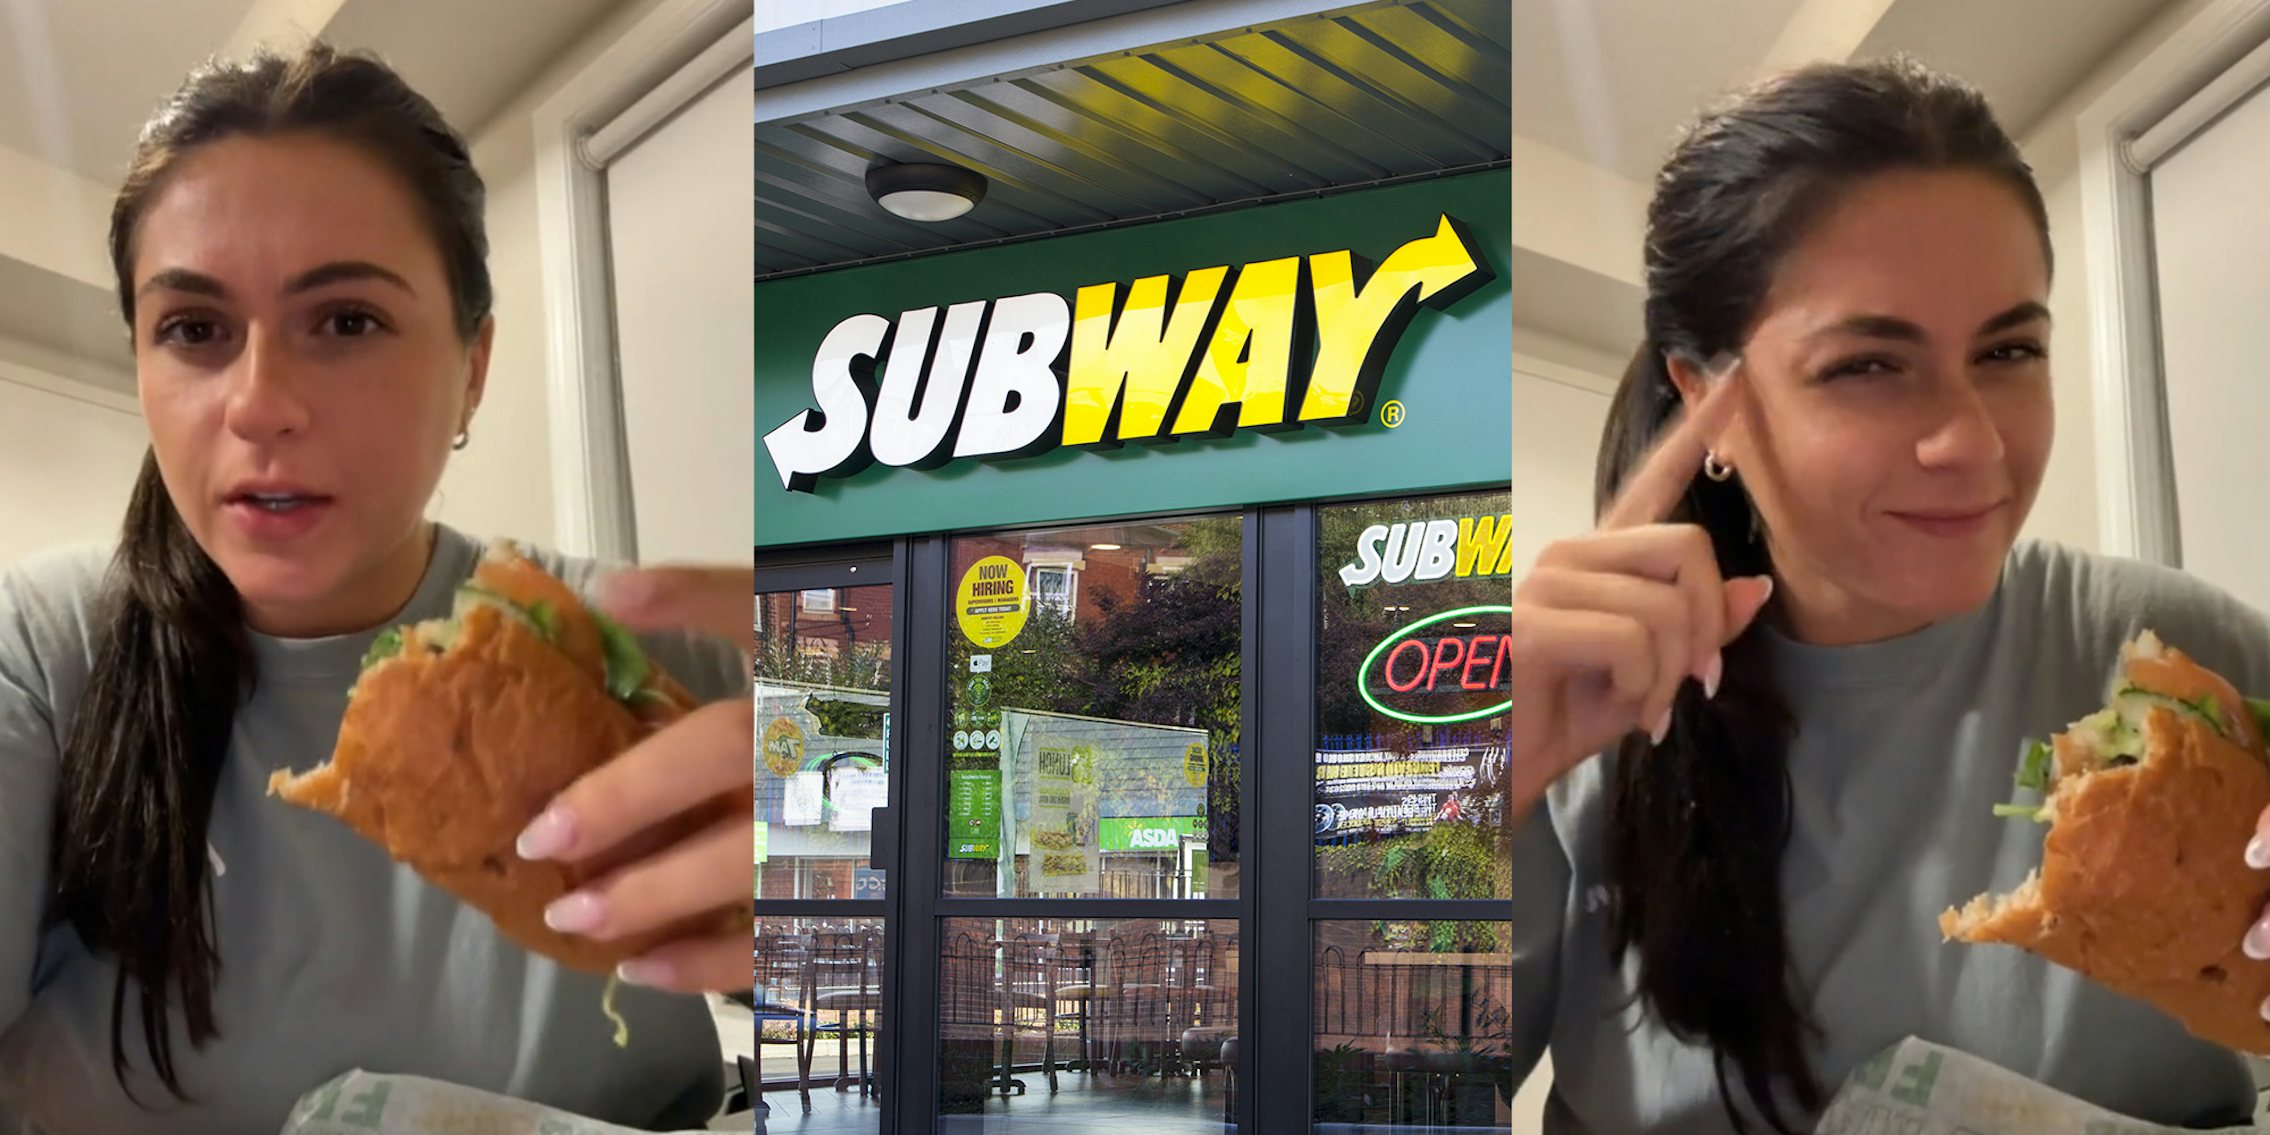 Subway customer leaves a tip for nice worker. It went to the manager who's not working